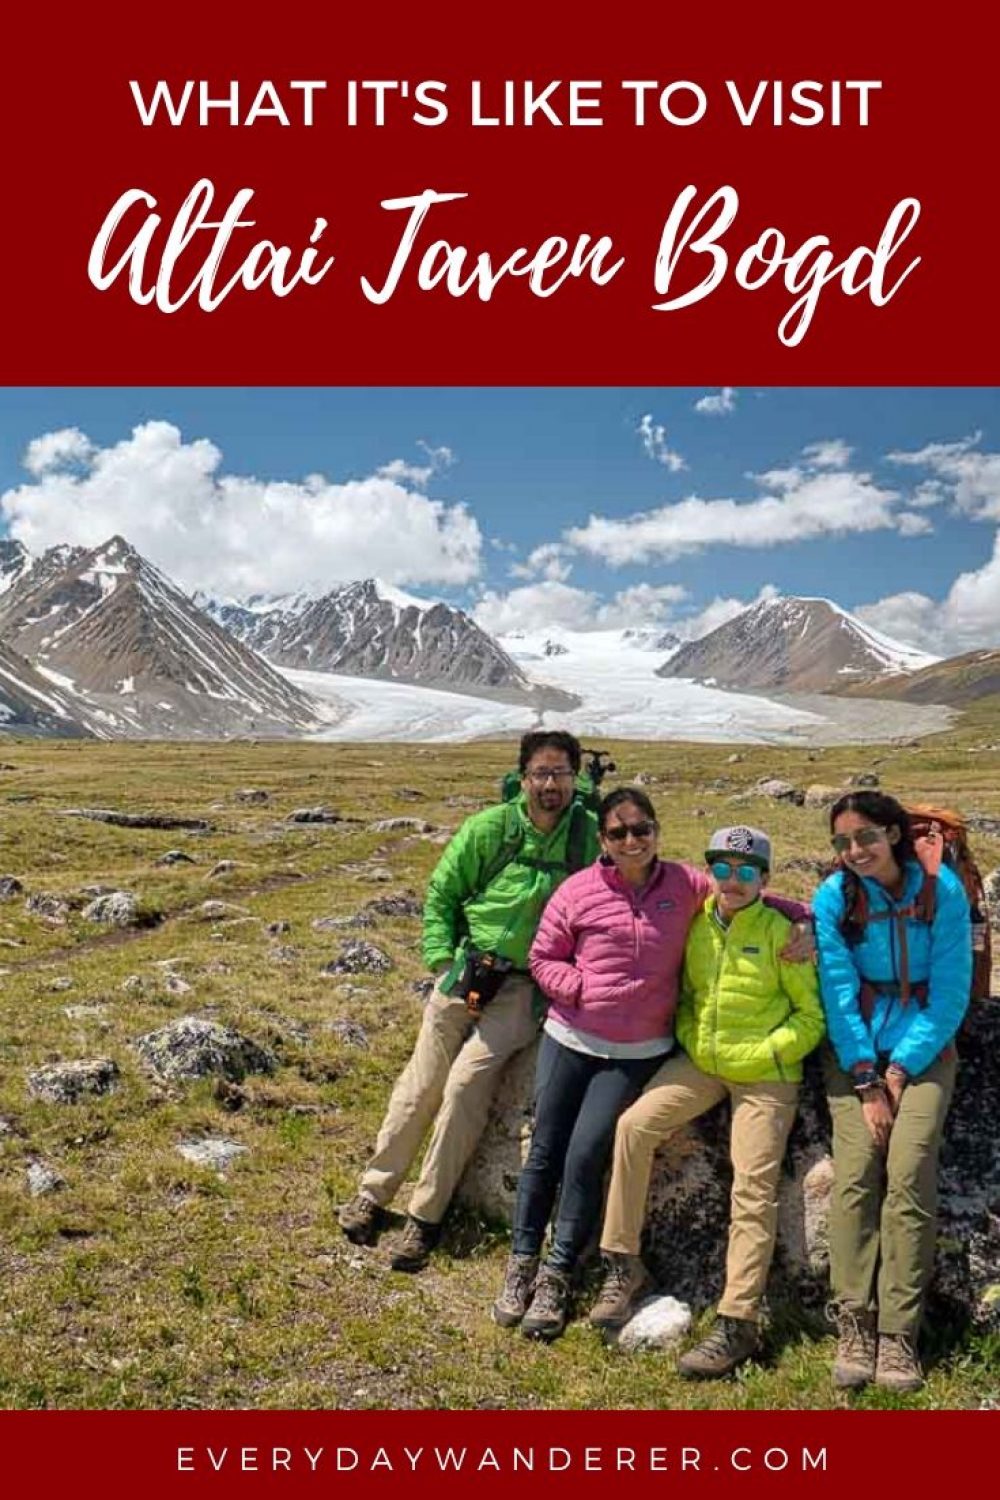 What it's like to visit the Altai Taven Bogd National Park in the Altai Mountains in Western Mongolia. Reasons why you should visit the Mongolian Altai Mountains including climbing Khuiten Peak and standing on the top of Mongolia. #mongolia #travel